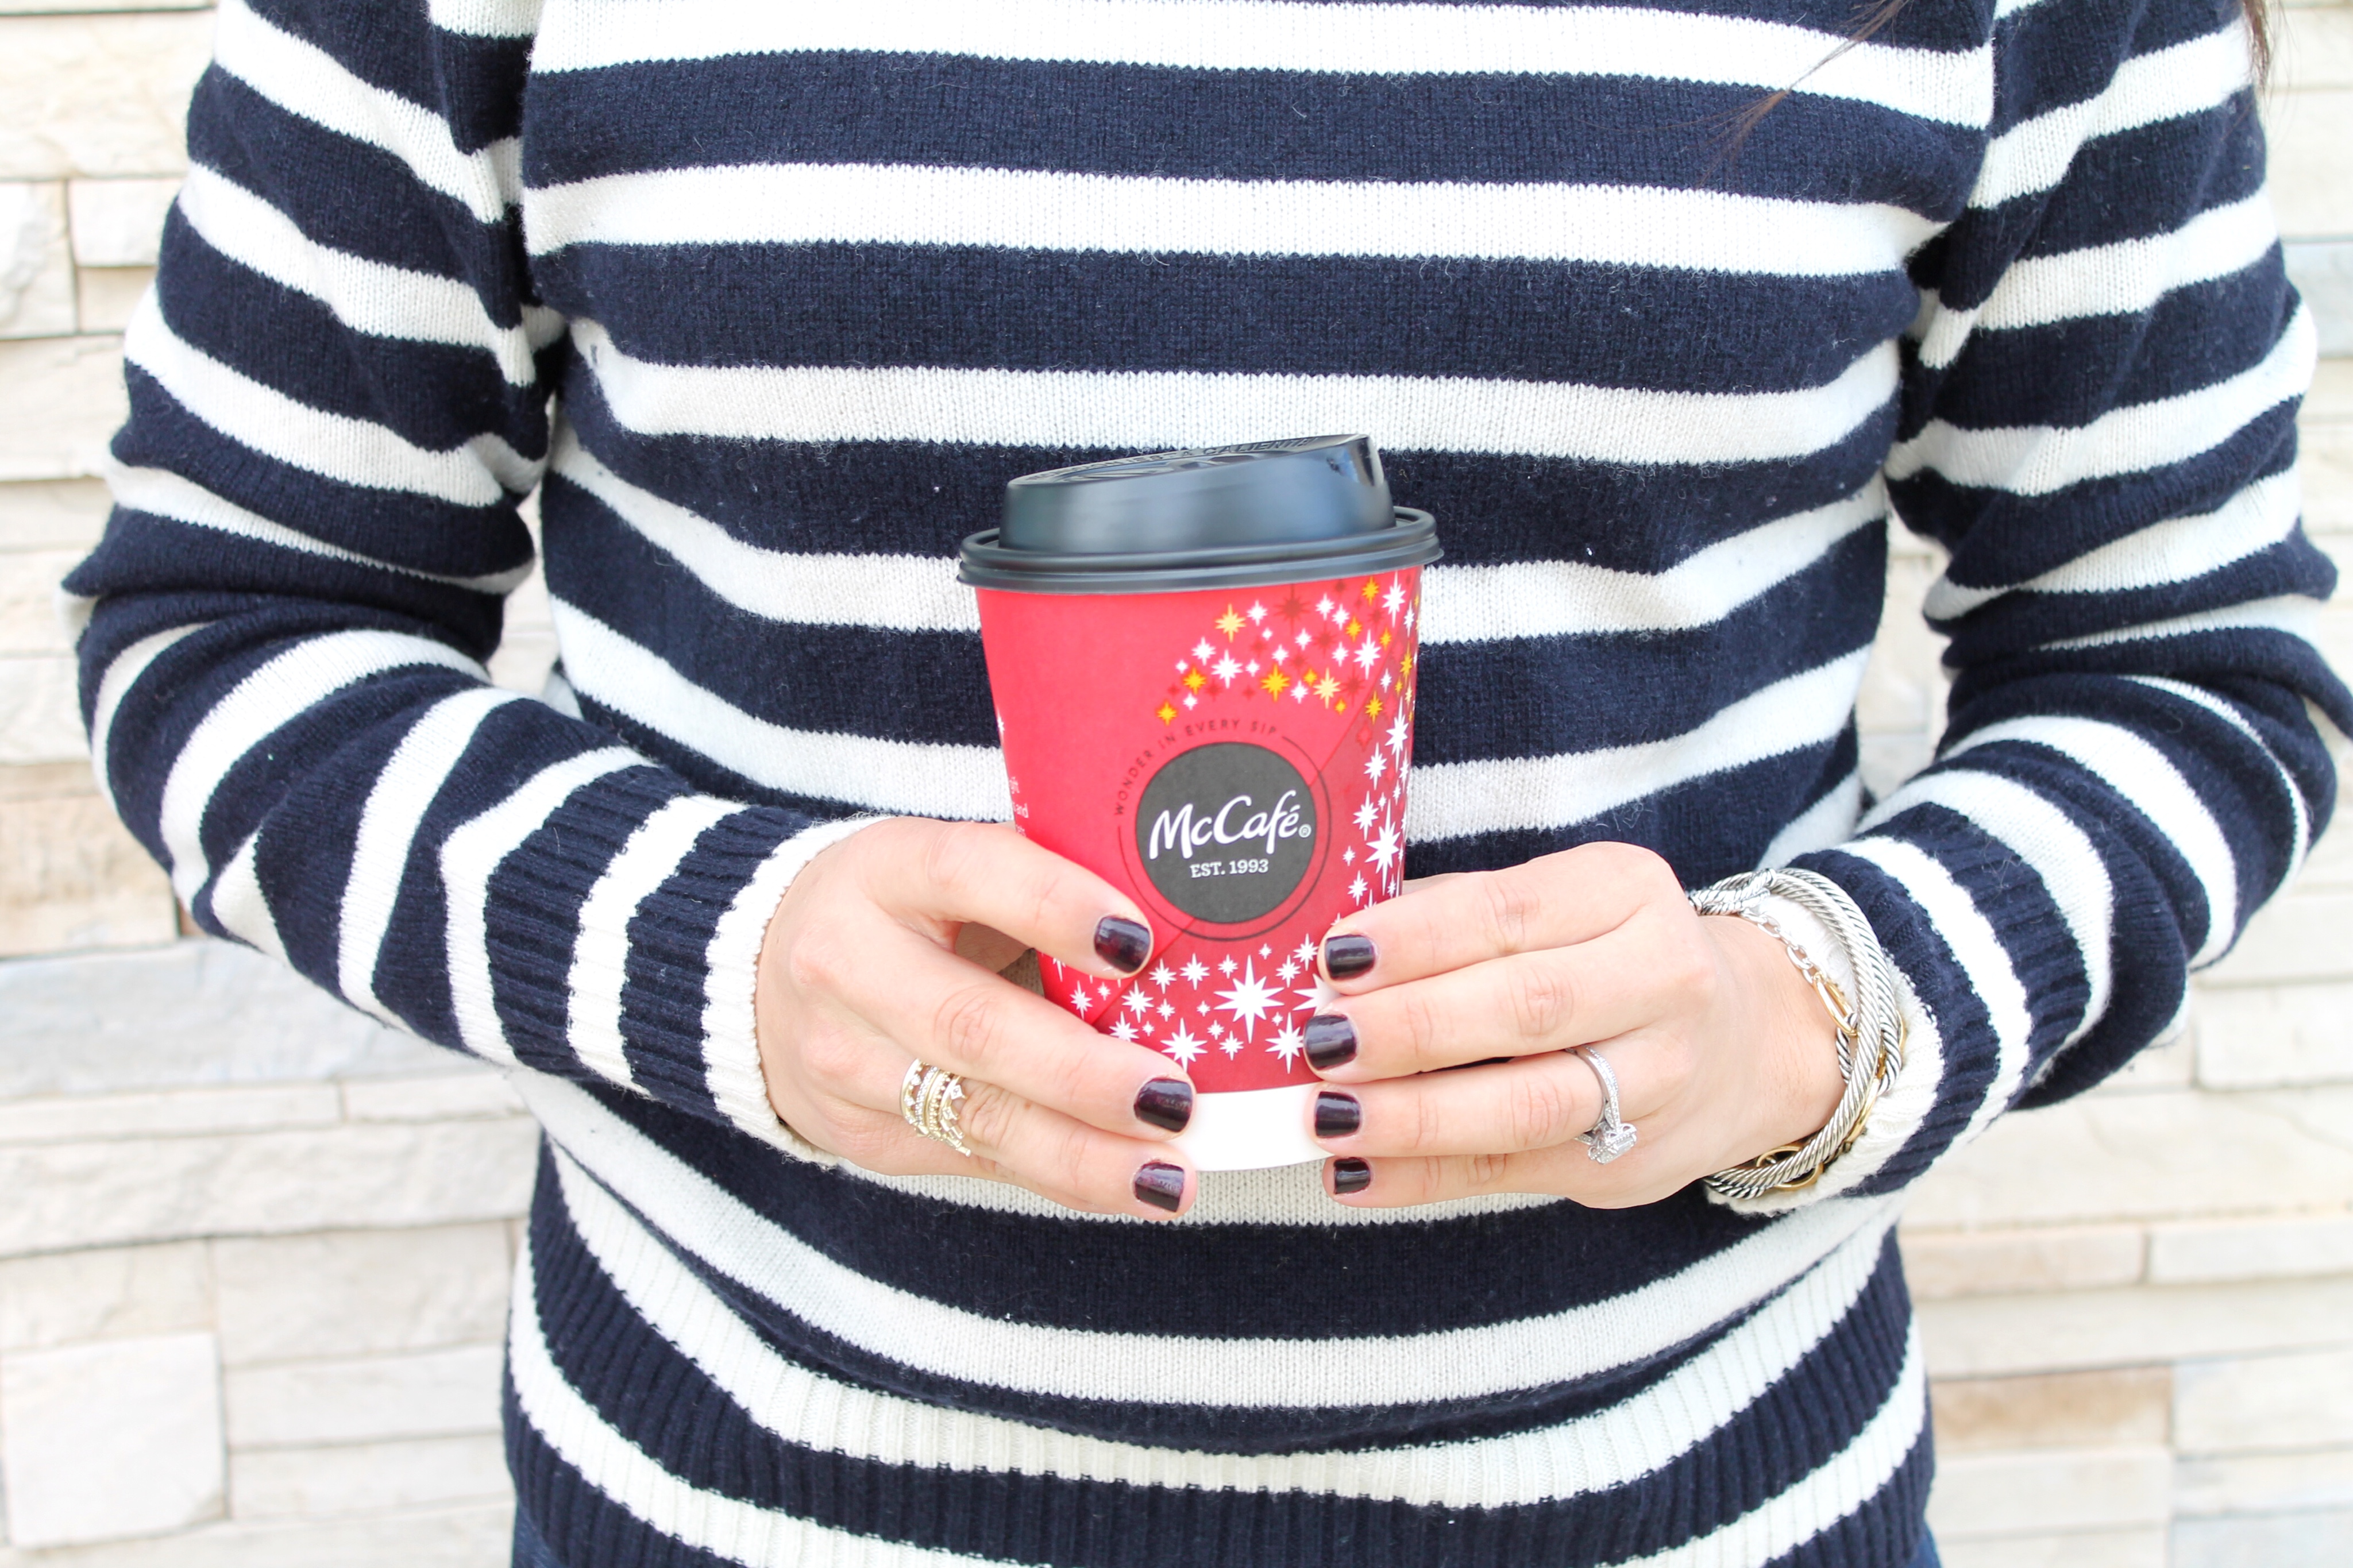 7 tips to create a stellar weekly routine! Number 1 is my favorite: coffee. Check out all the details in this must-read. #ad #mccafe #mcdonalds #coffee